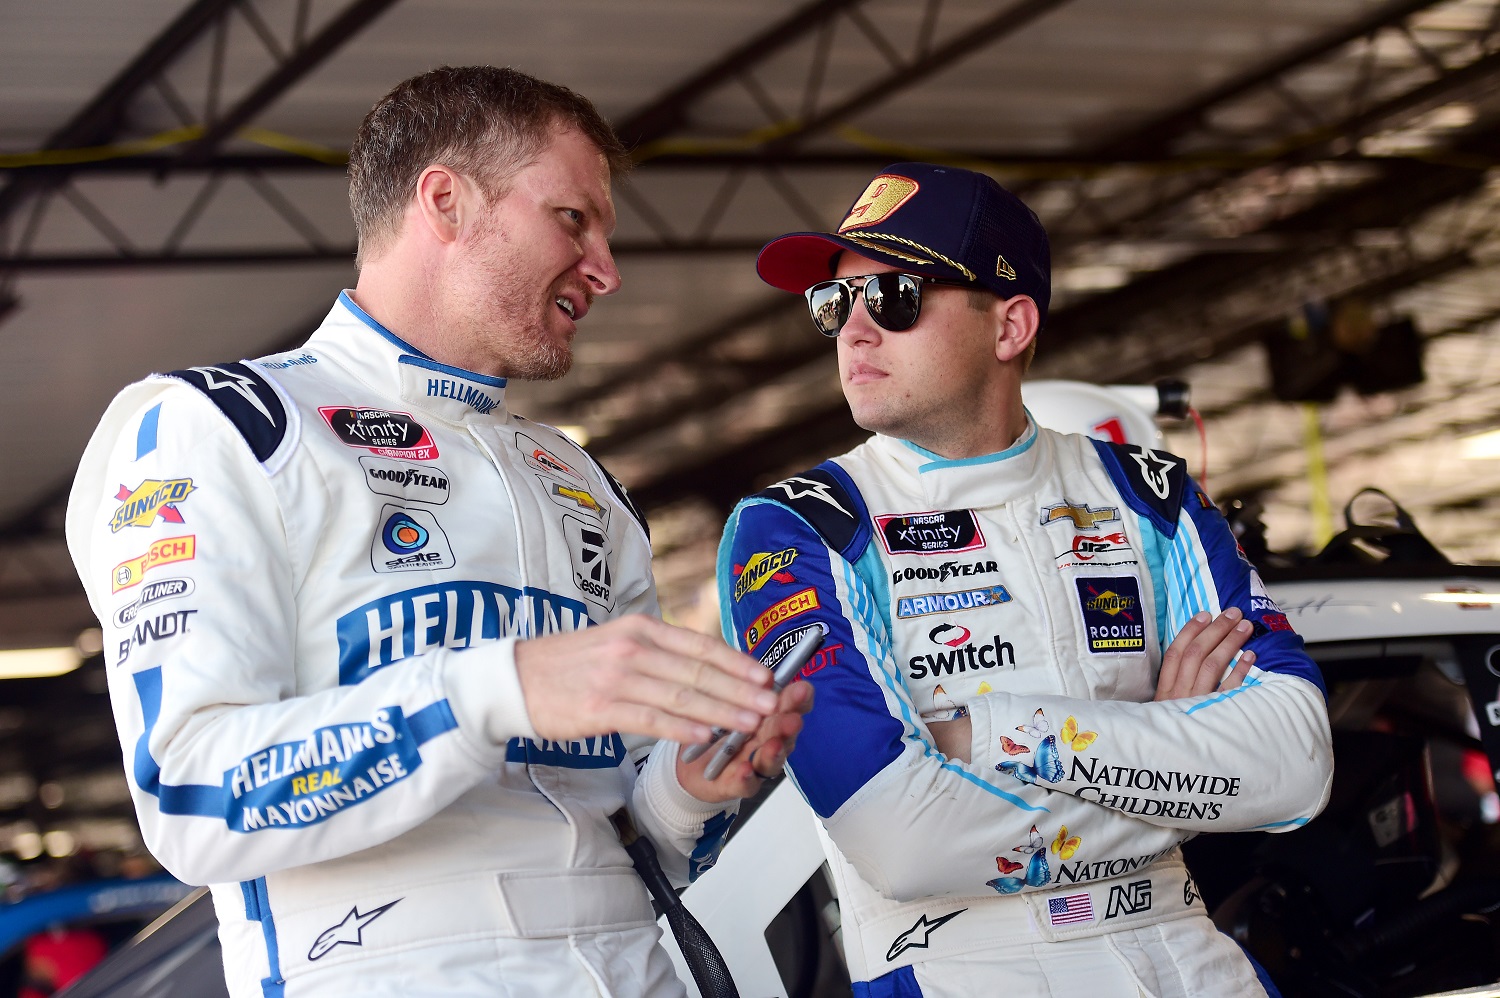 Dale Earnhardt Jr. and Noah Gragson speak in the garage during practice for the NASCAR Xfinity Series Sport Clips Haircuts VFW 200 at Darlington Raceway on Aug. 30, 2019. | Jared C. Tilton/Getty Images